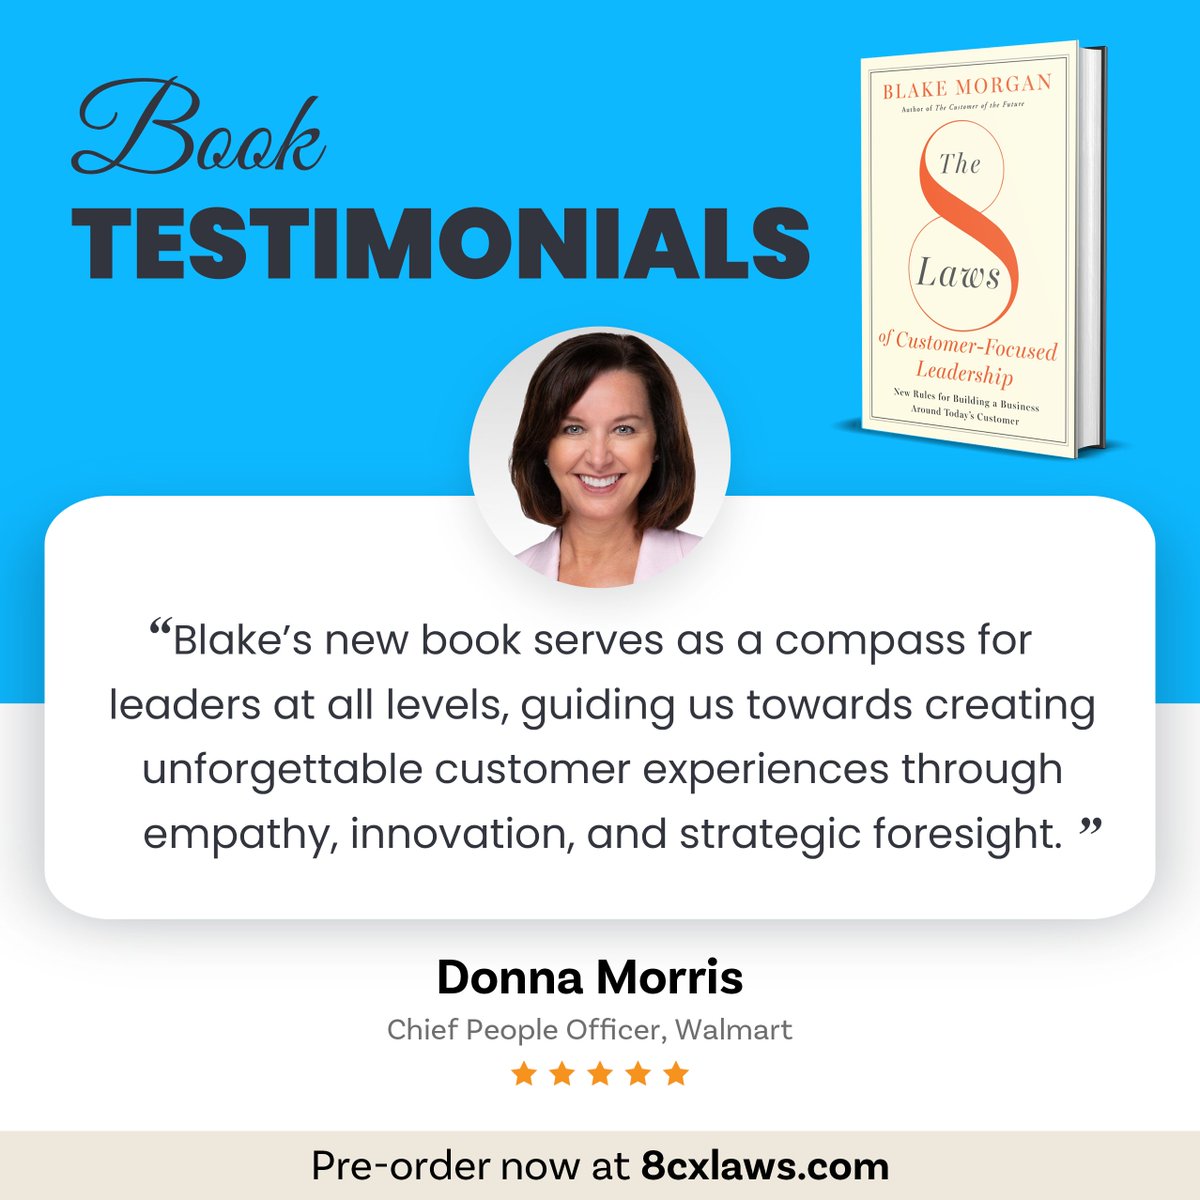 ANNOUNCEMENT! My new book will be here this summer! Leaders we are upleveling the CX conversation 💡 My new book, “The 8 Laws of Customer-Focused Leadership,” is your essential guide. Endorsed by industry leaders like Donna Morris, EVP, and Chief People Officer at Walmart,